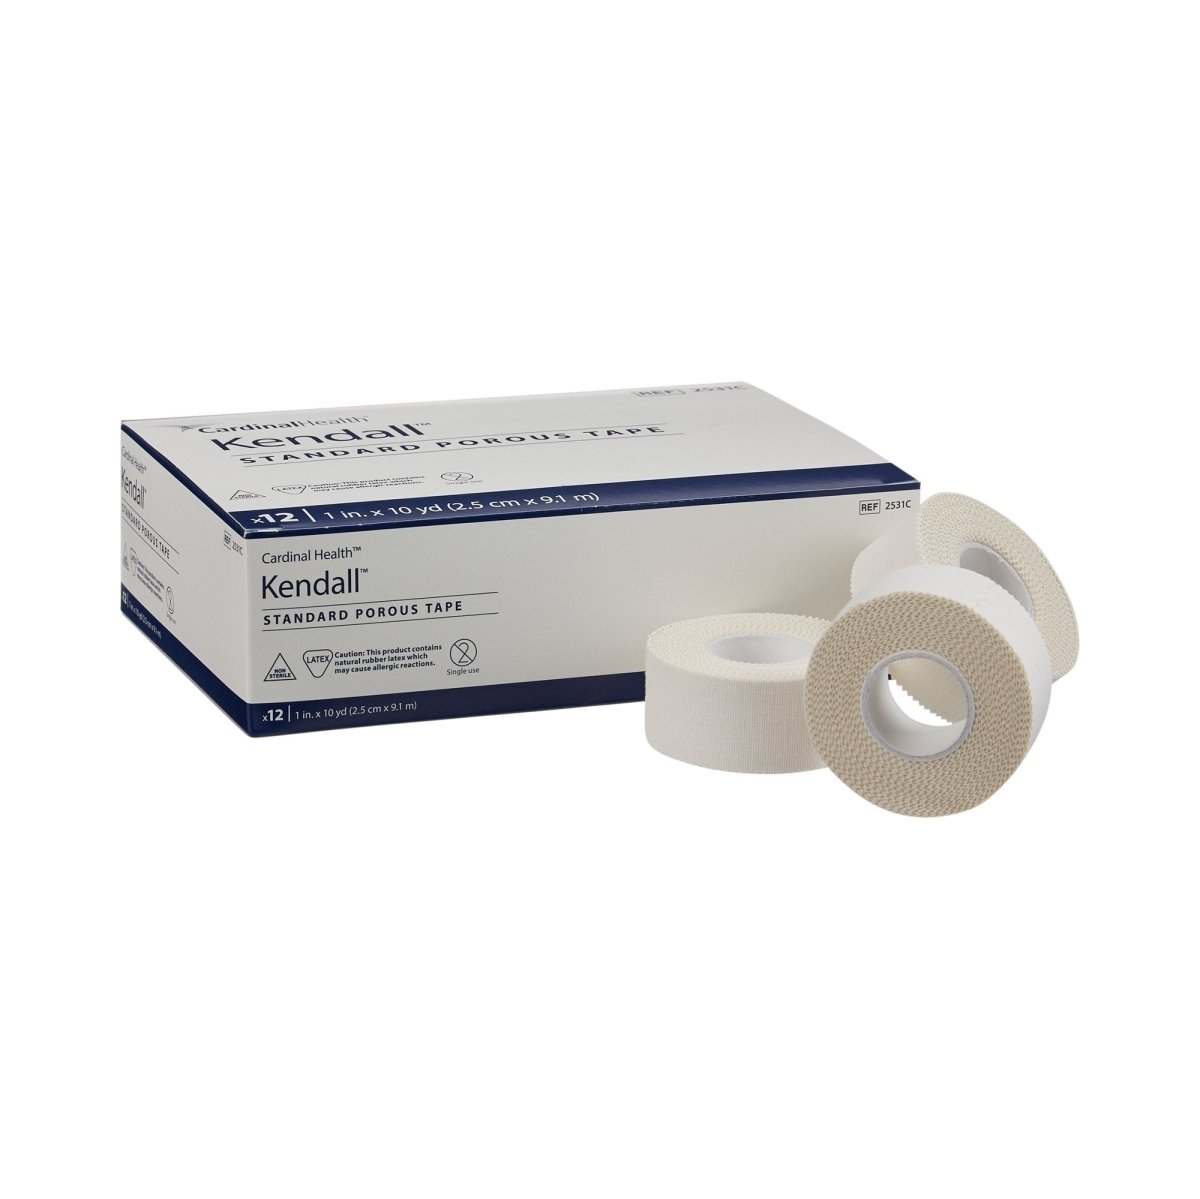 Kendall Cloth Medical Tape - 742655_BX - 1